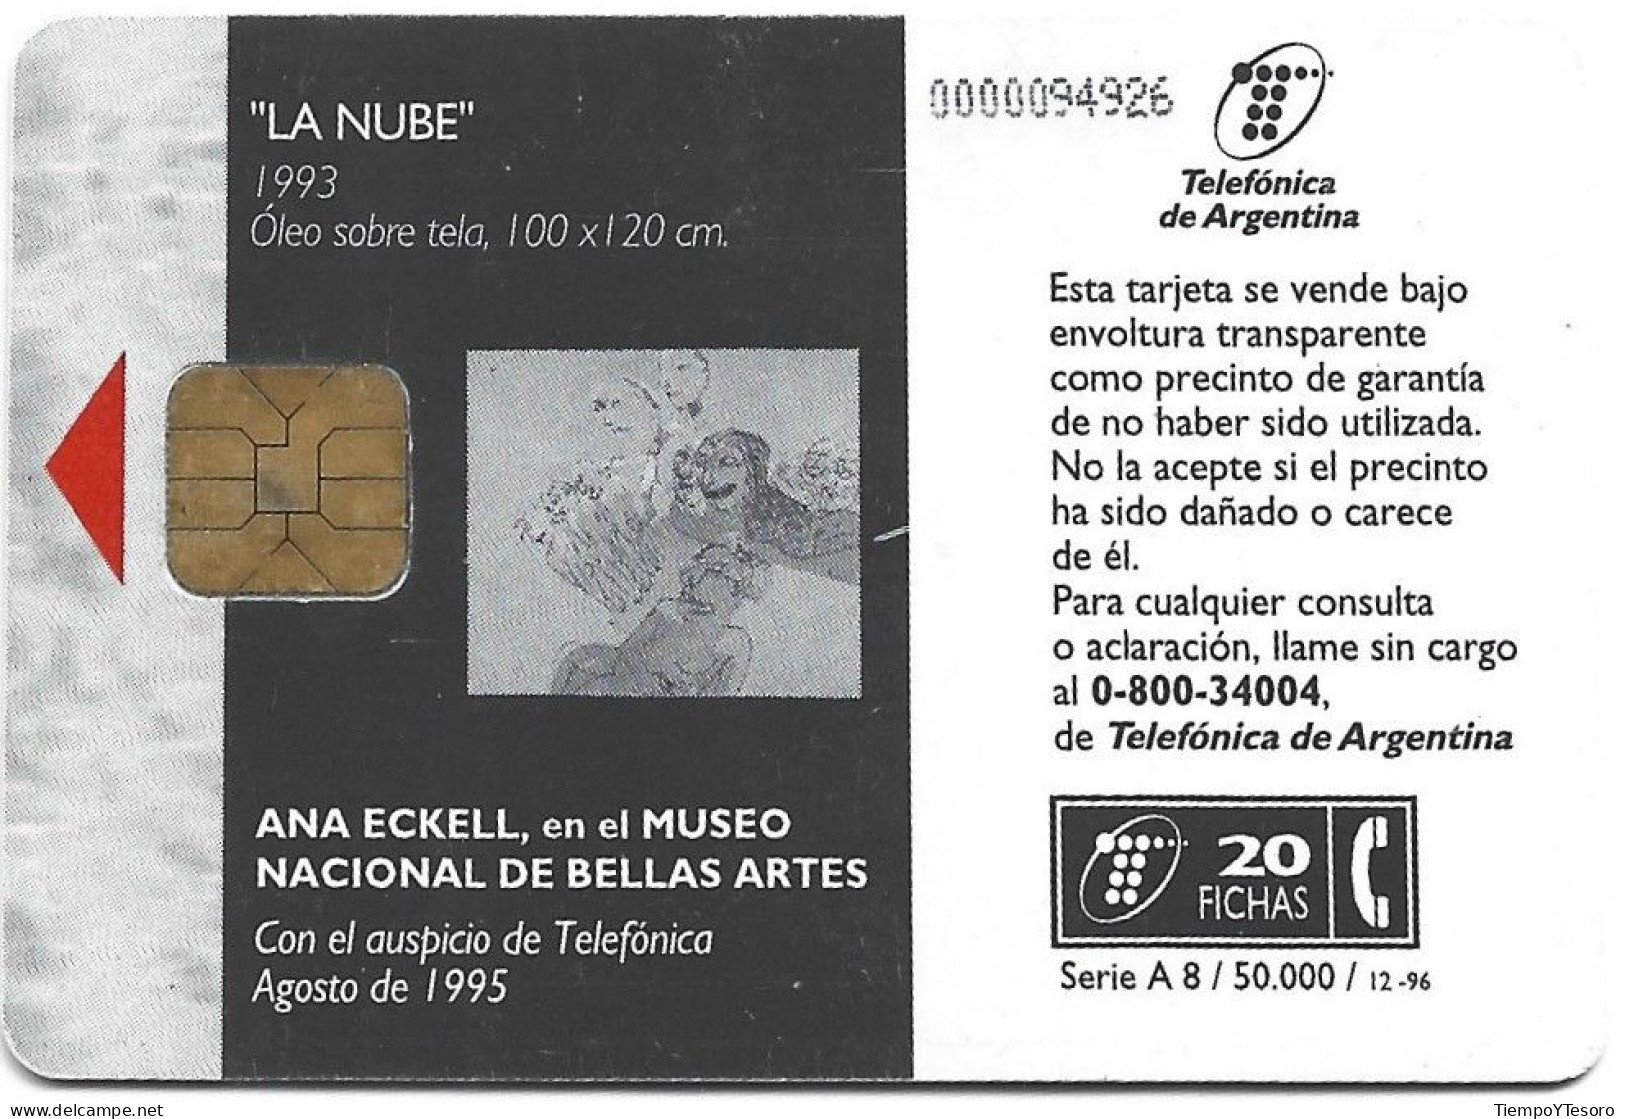 Phonecard - Argentina, Ana Eckell Painting, N°1124 - Lots - Collections